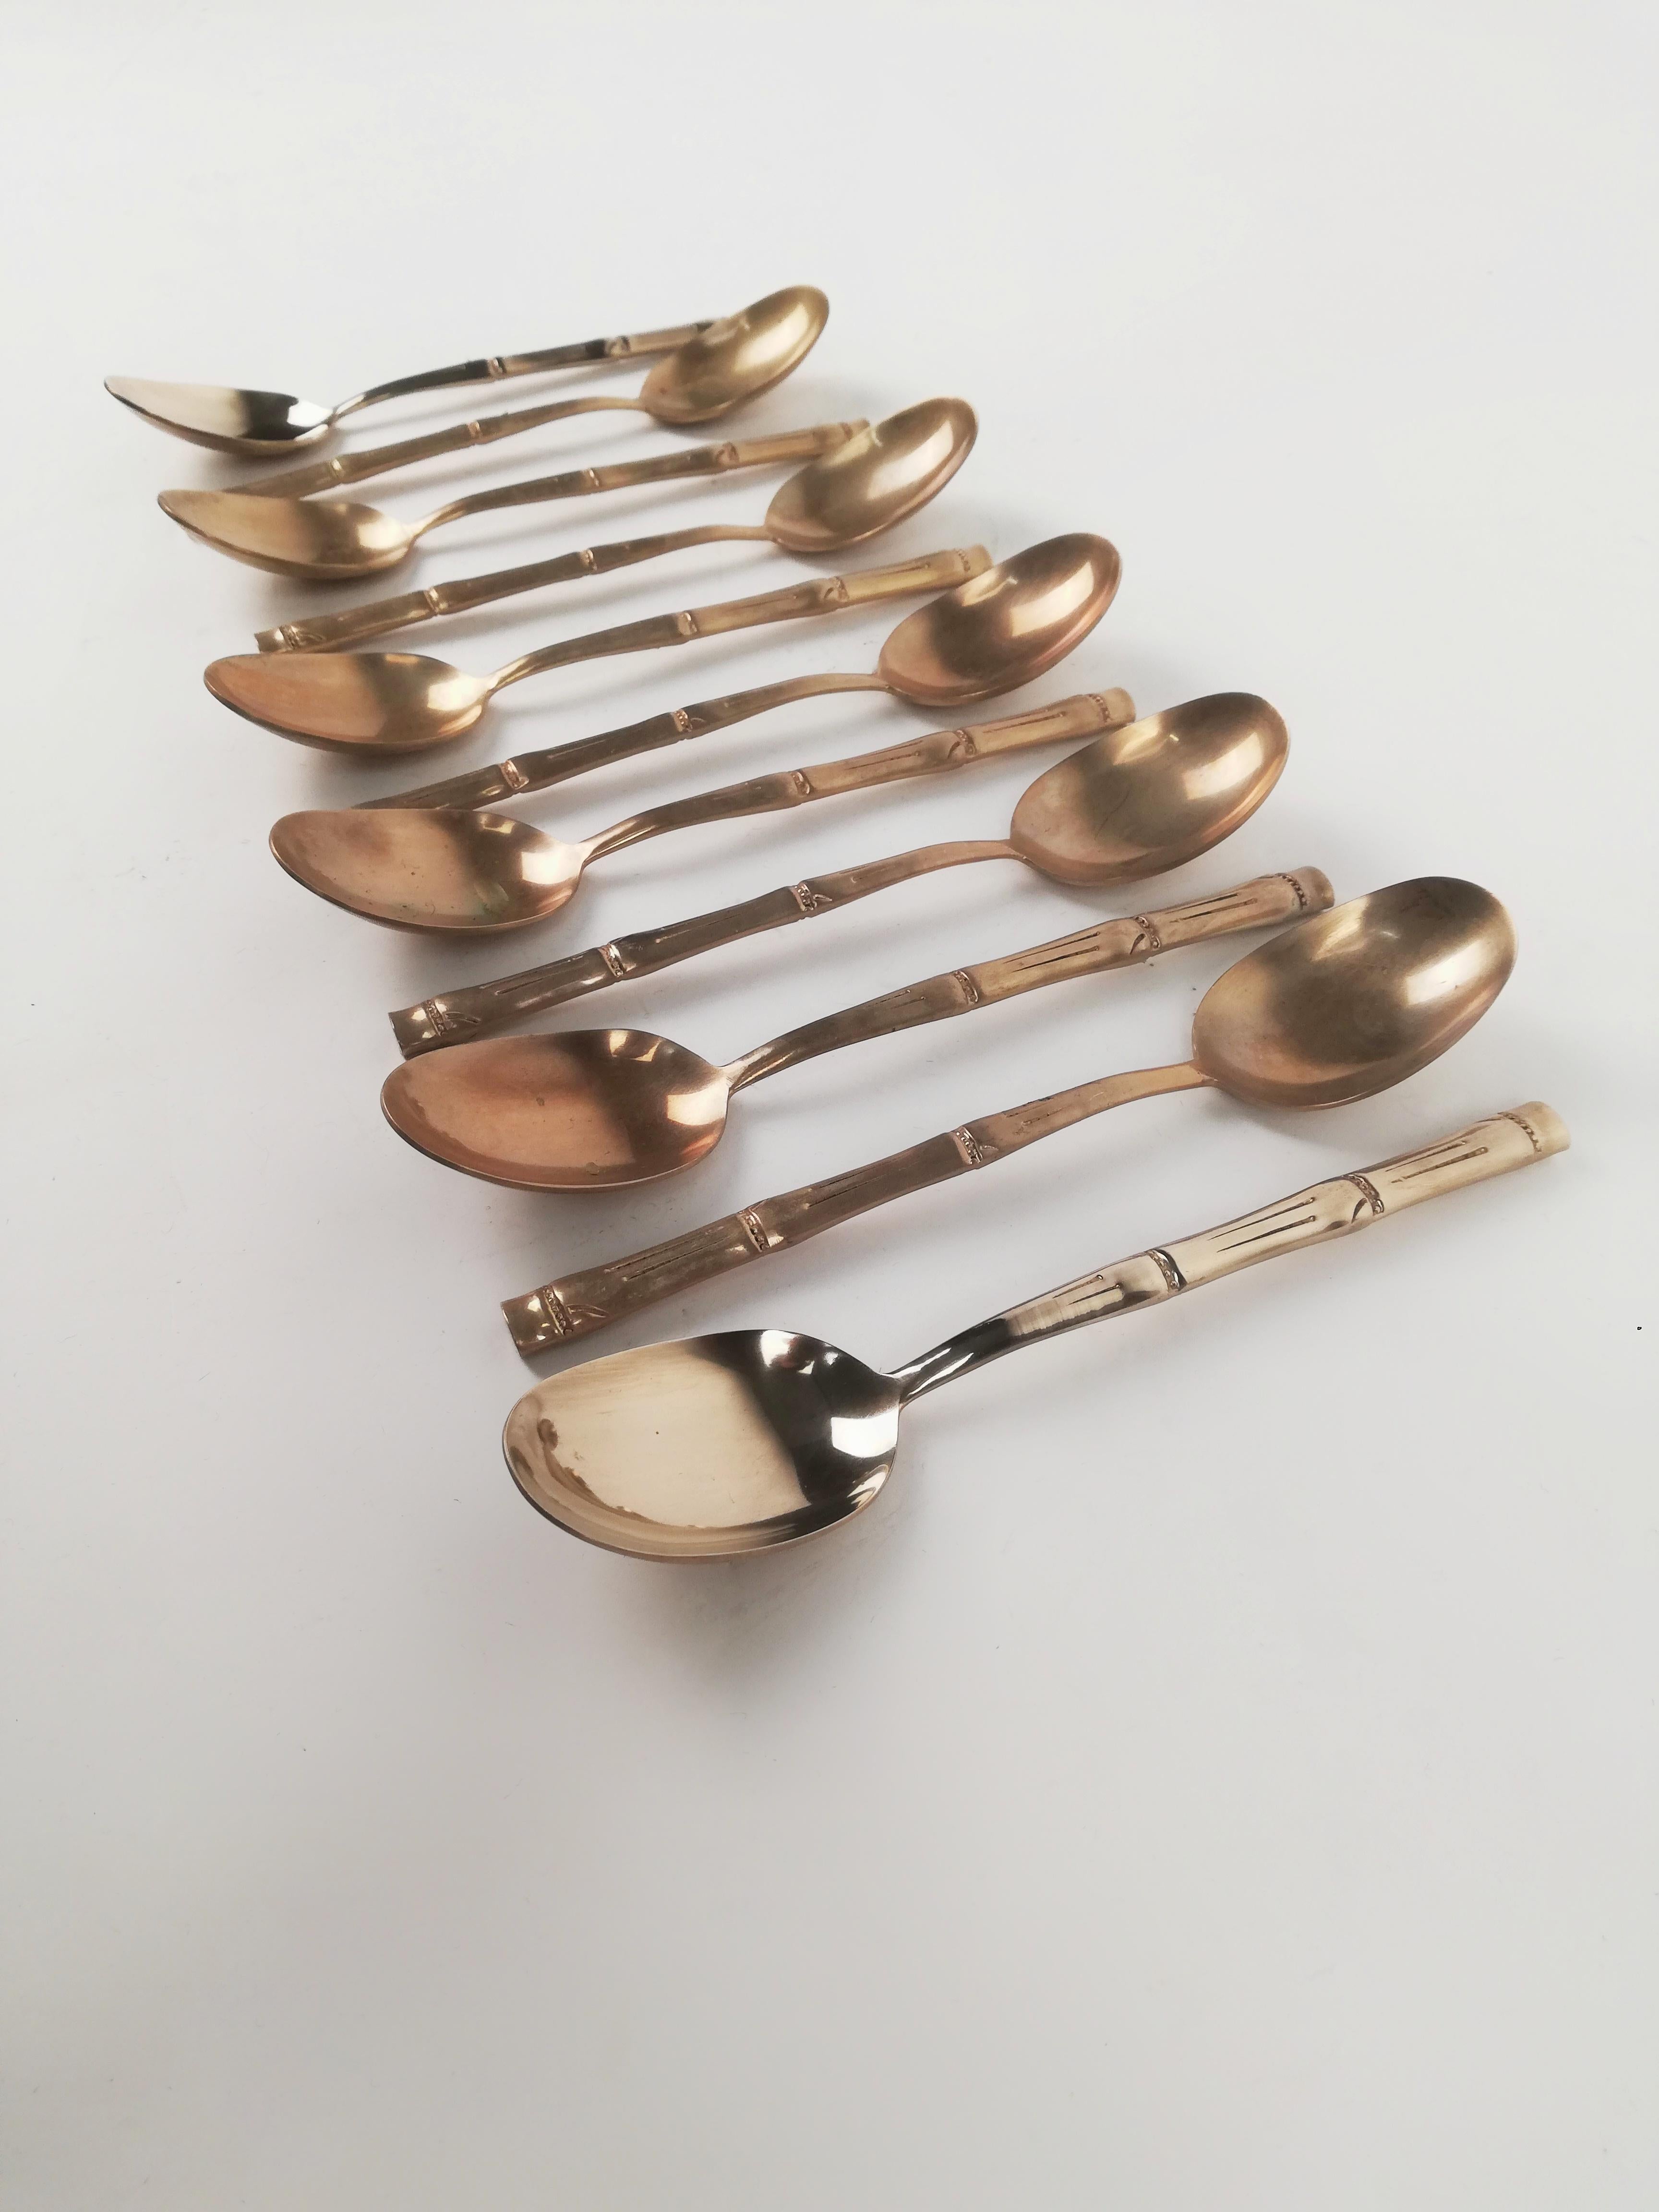 1970s Cutlery Set in the Hollywood Regency style, made in brass faux bamboo.
A set consisting of 144 pieces divided as follows:

Forks
19 Normal Forks
8 Forks slightly smaller than normal
12 Fork with 3 prongs
11 Fish forks

Knife
24 Normal knife
11